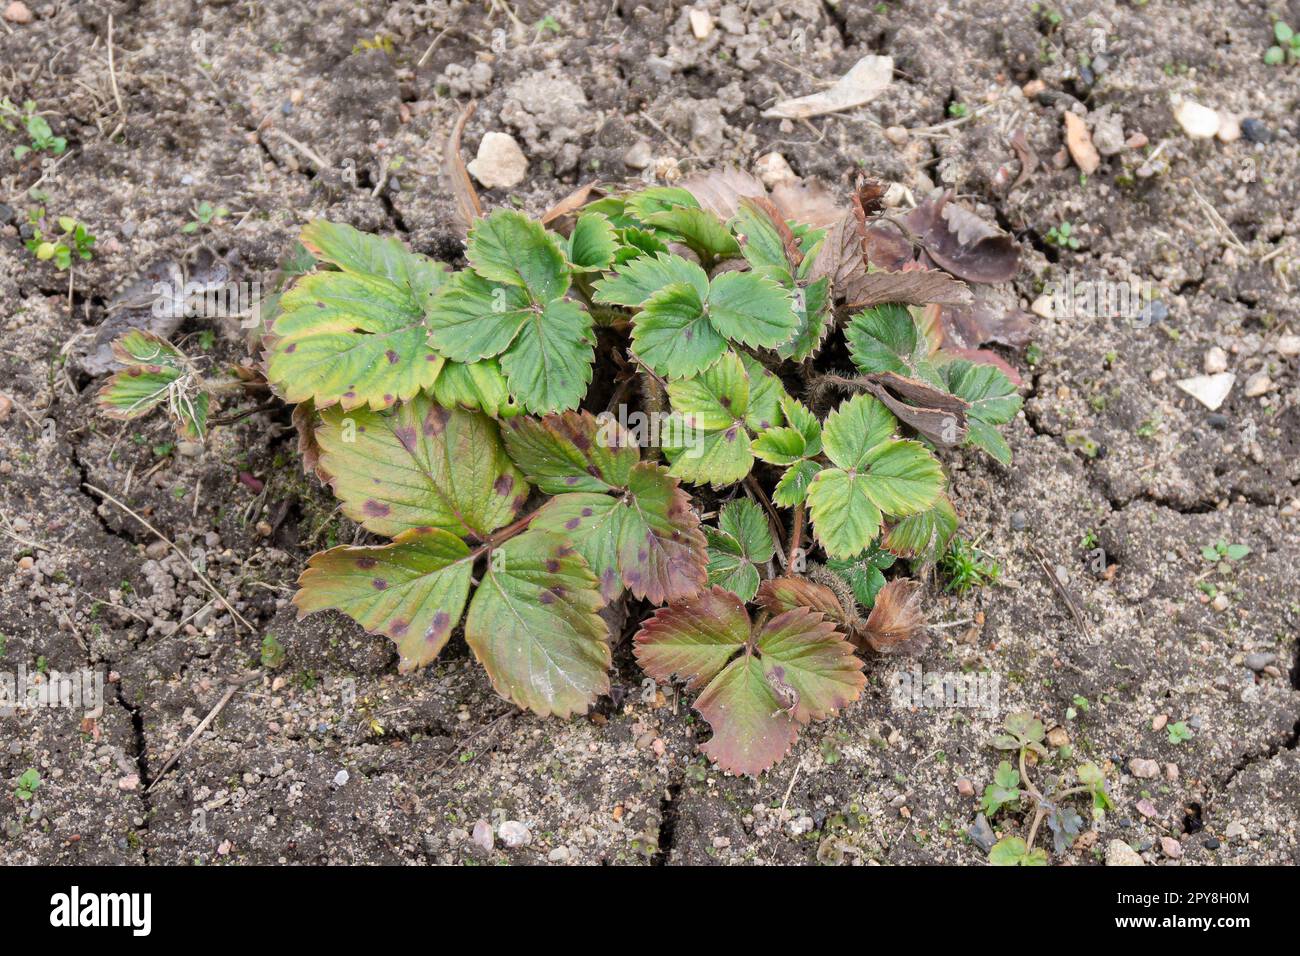 Old Strawberry bush before cleanup in a Spring Garden. Plants with Dry Brown Leaves with Reddish-brown Spots. Symptoms of Strawberry Disease. Stock Photo